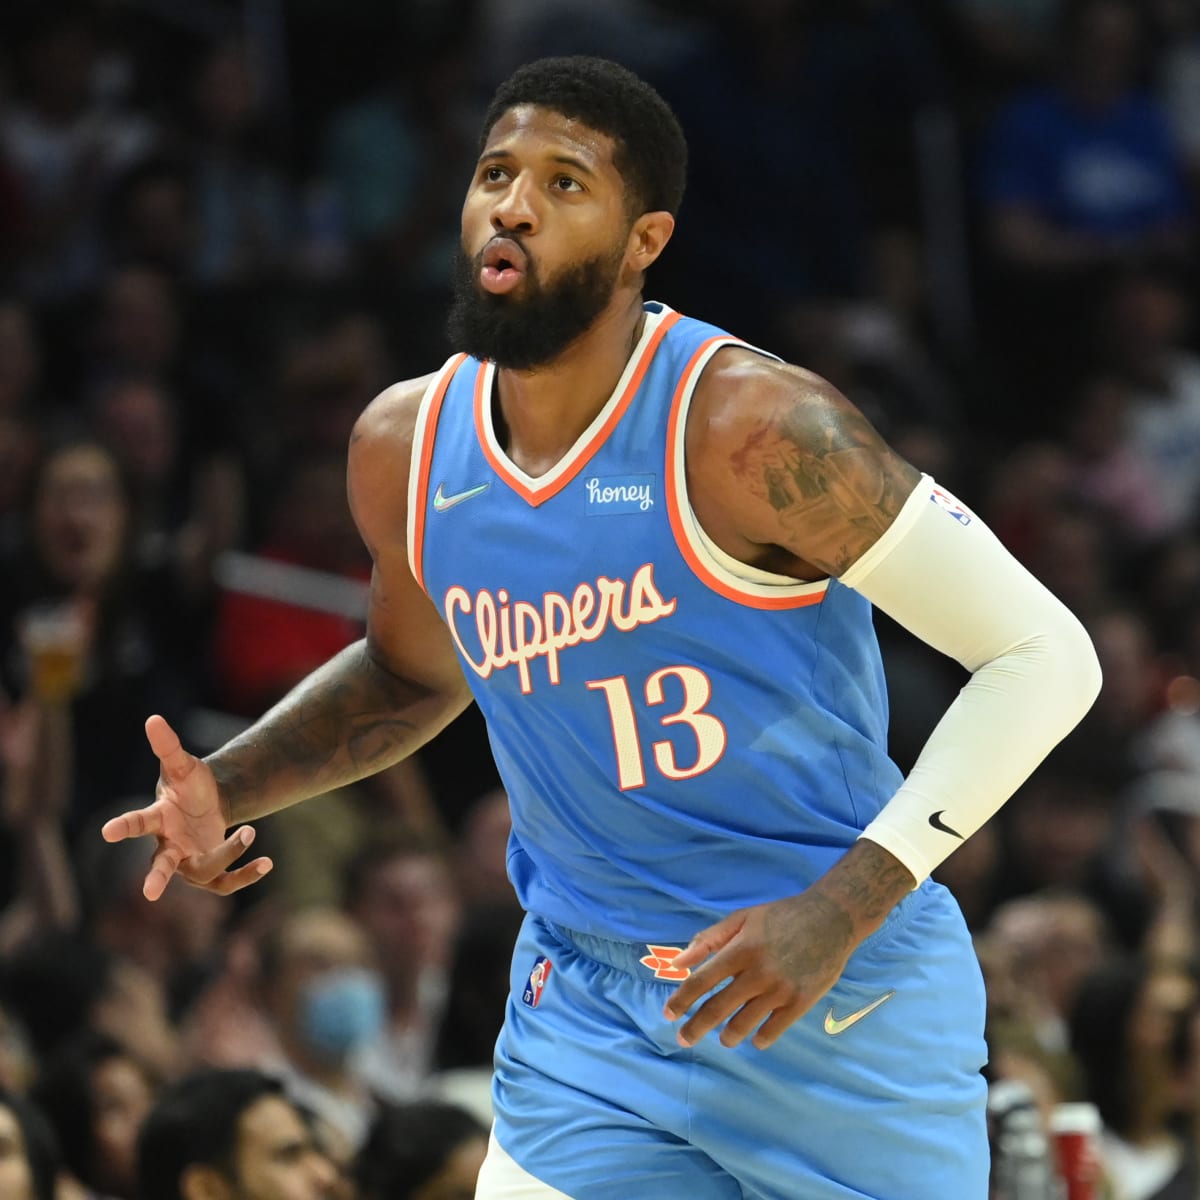 Paul George report card: Mostly A's, with a couple of notable